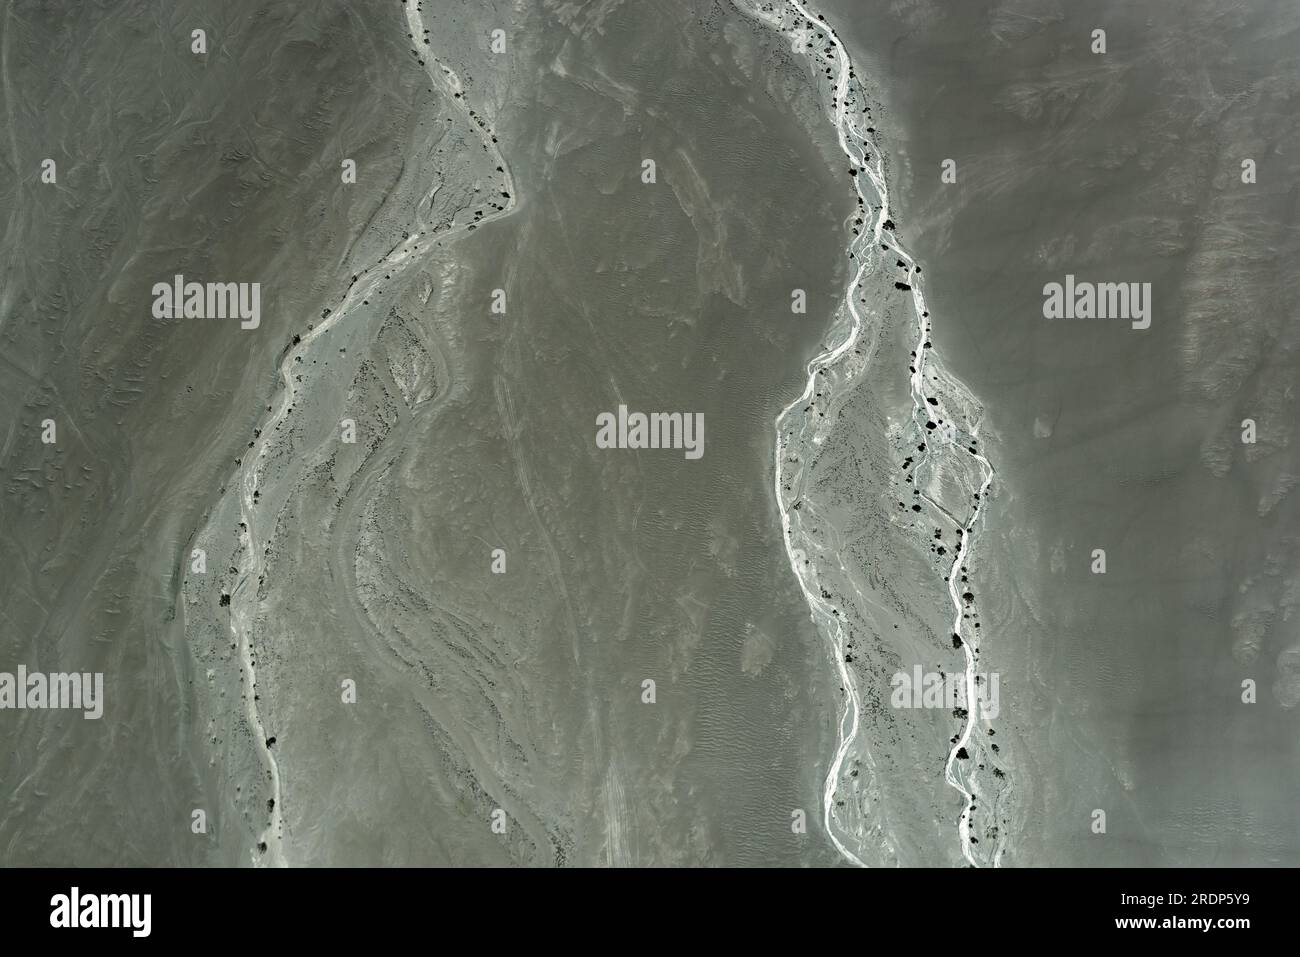 Aerial landscape view of the Nazca desert near Nazca Lines with dry riverbed and rivers during a flight, Peru. Stock Photo